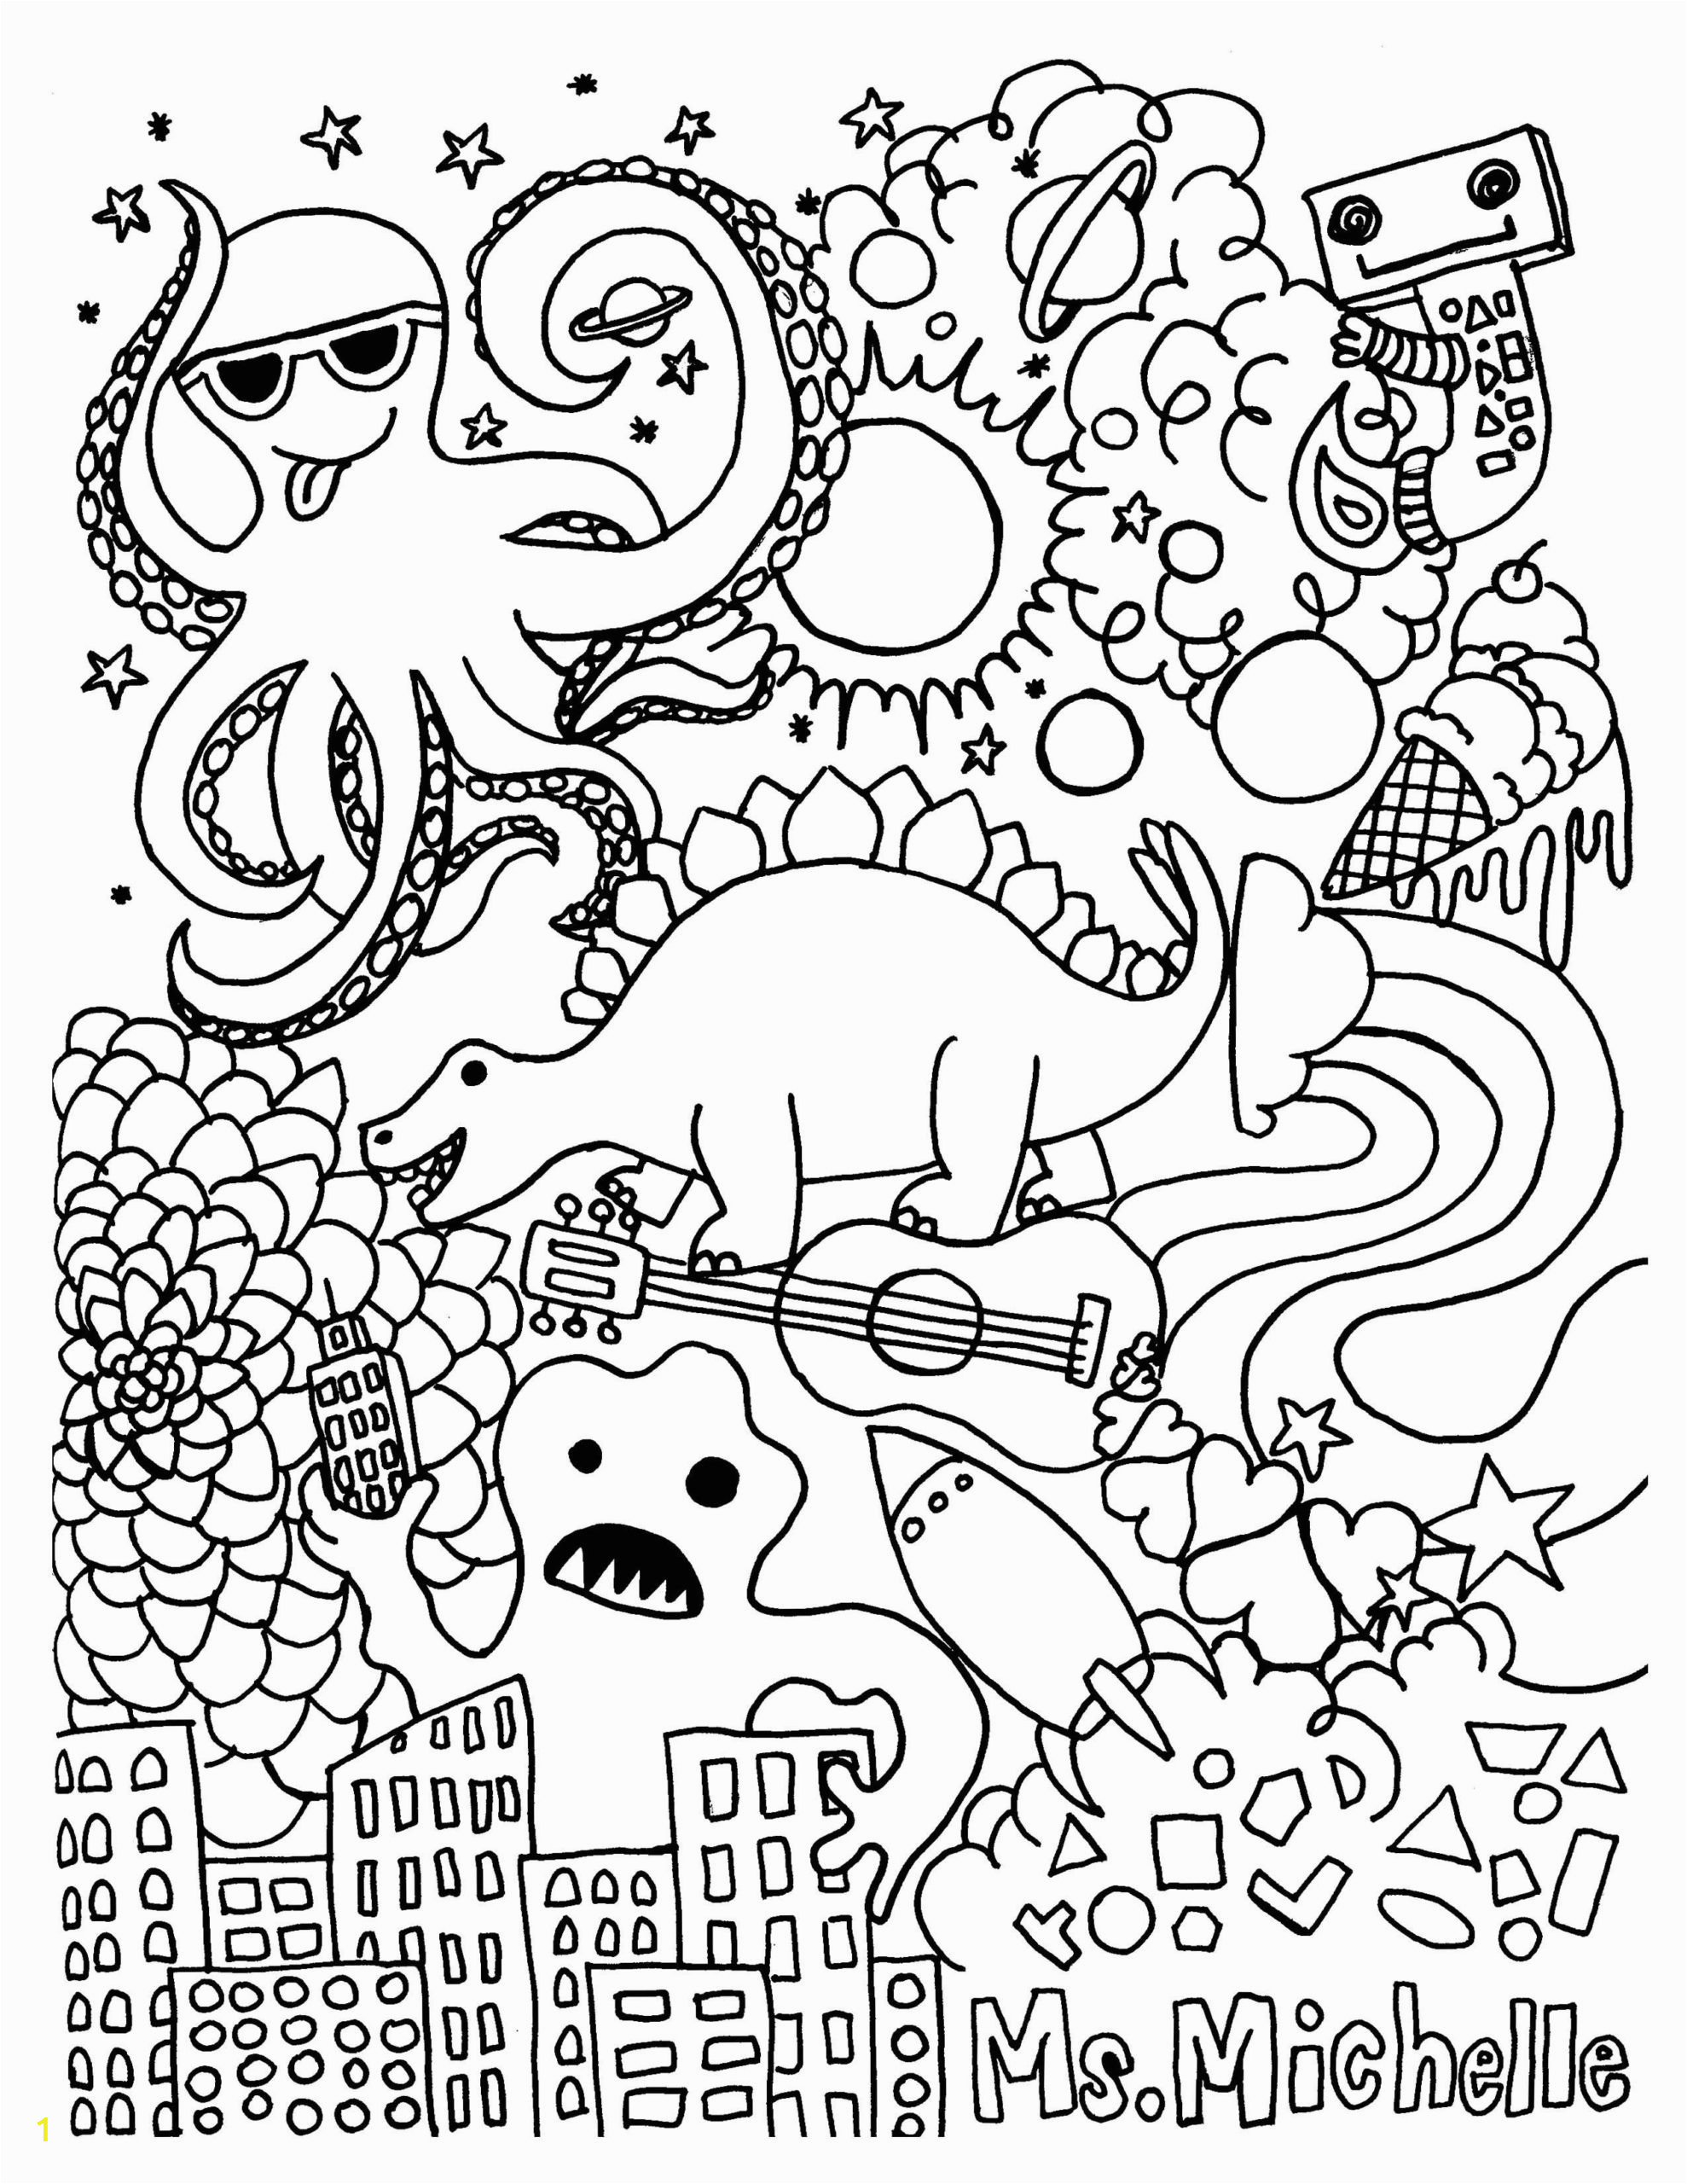 Cute Coloring Pages Halloween Coloring Books Love You Adult Coloring Pages Celtic